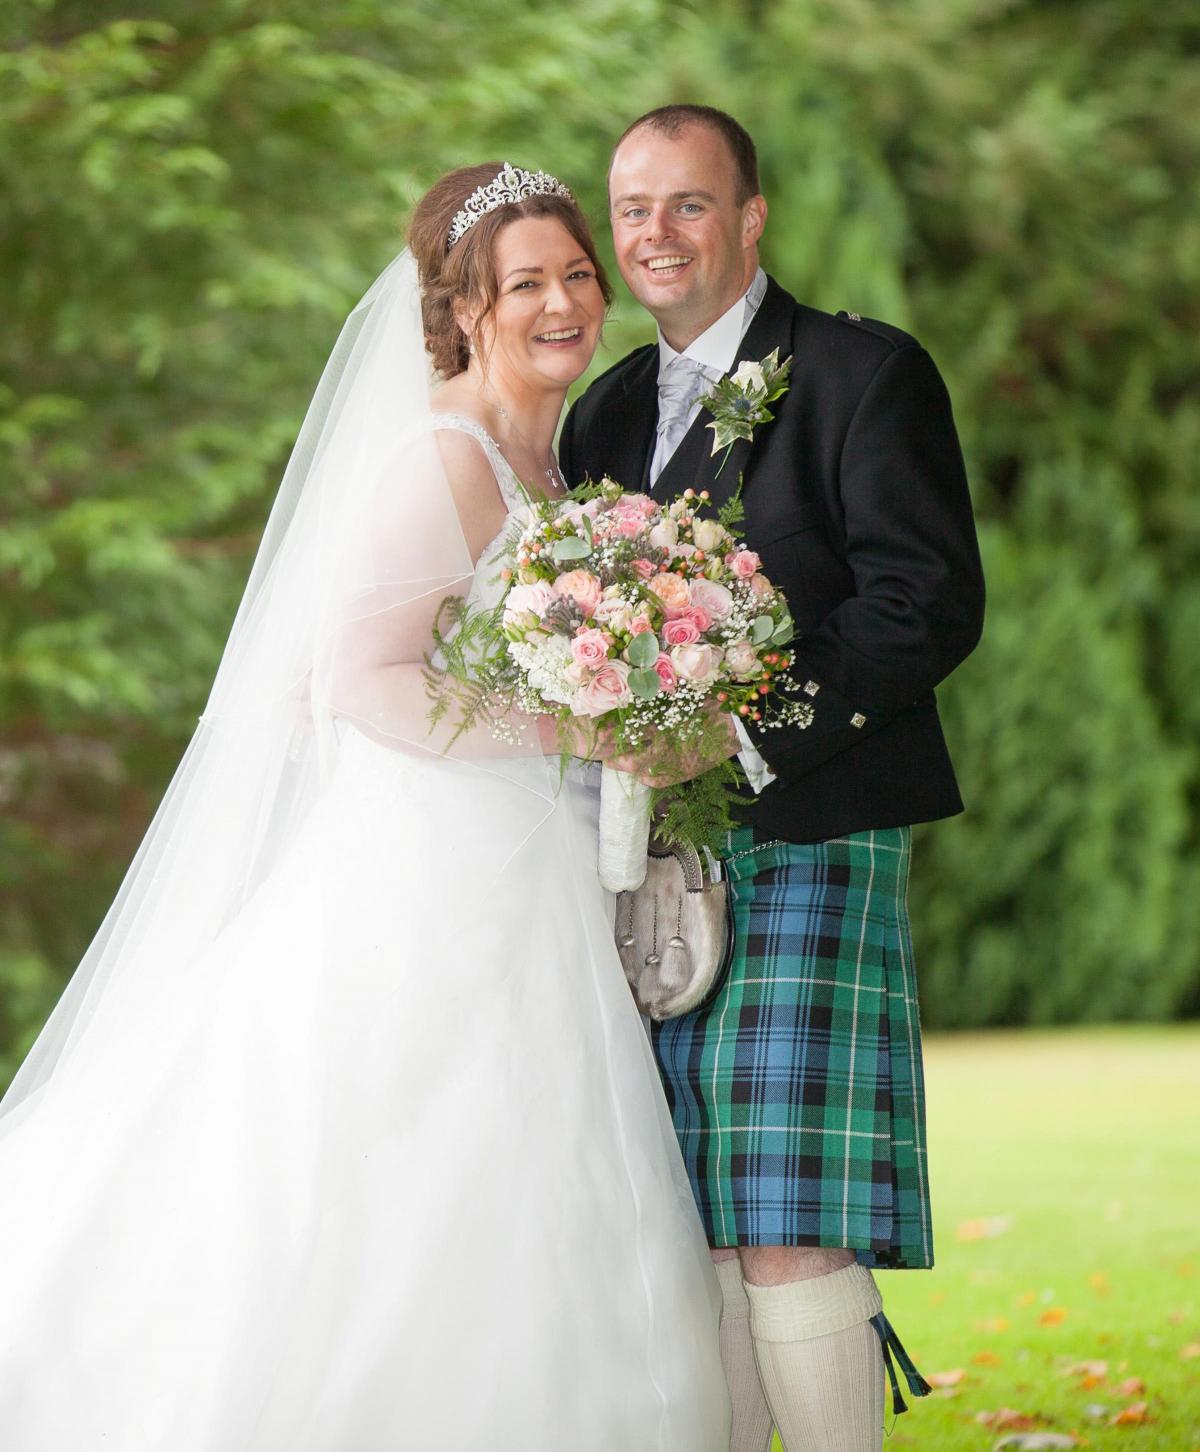 Shona McDougall, of Carntyne, Glasgow, married Neil Meikle, of Lesmahagow, at The Crichton Churc,h Dumfries followed by reception at Easterbrook Hall